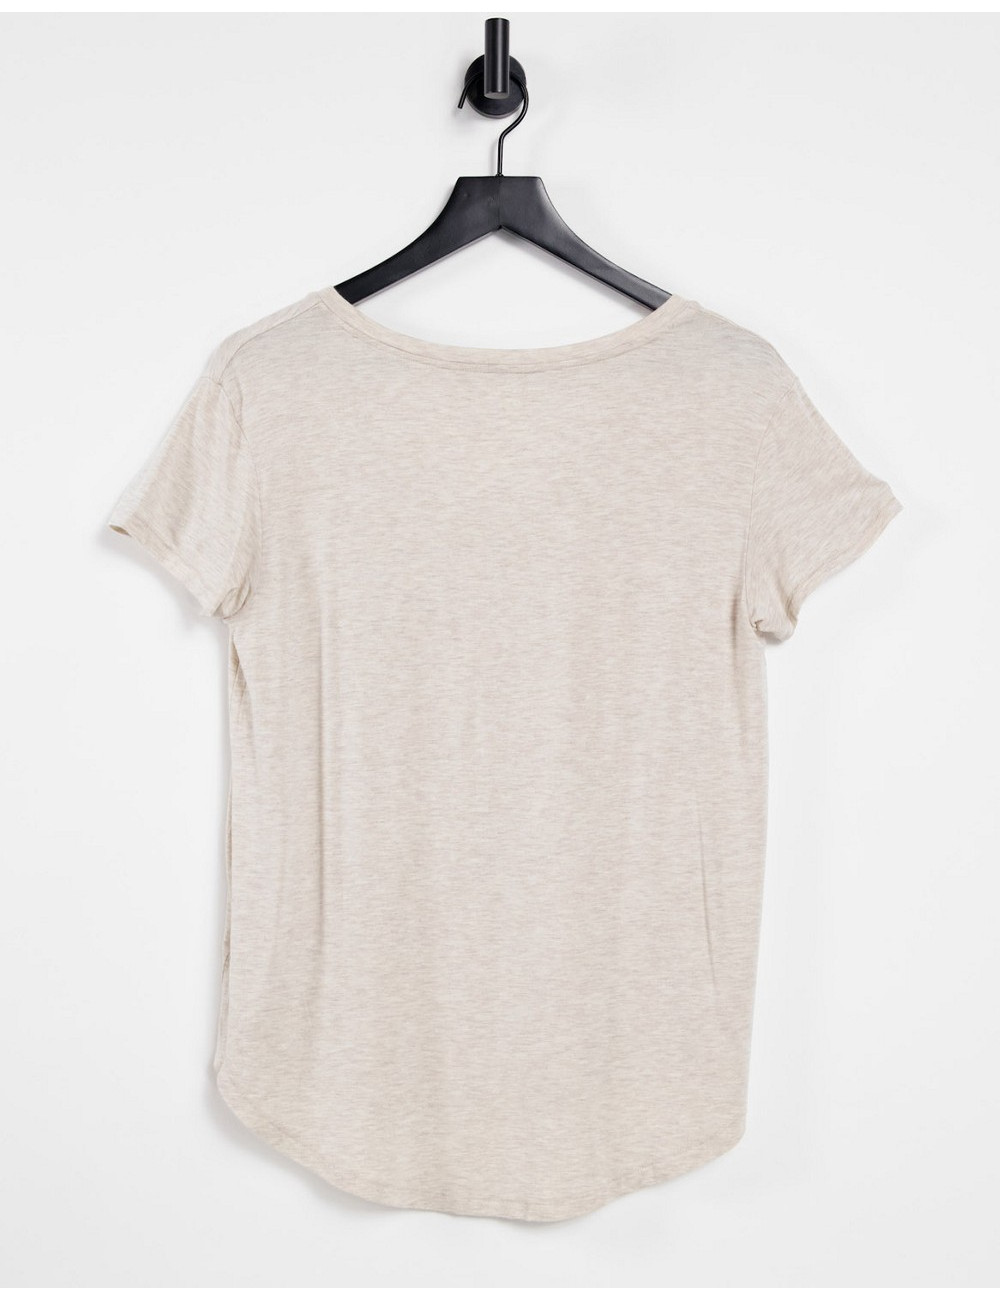 American Eagle t shirt with...